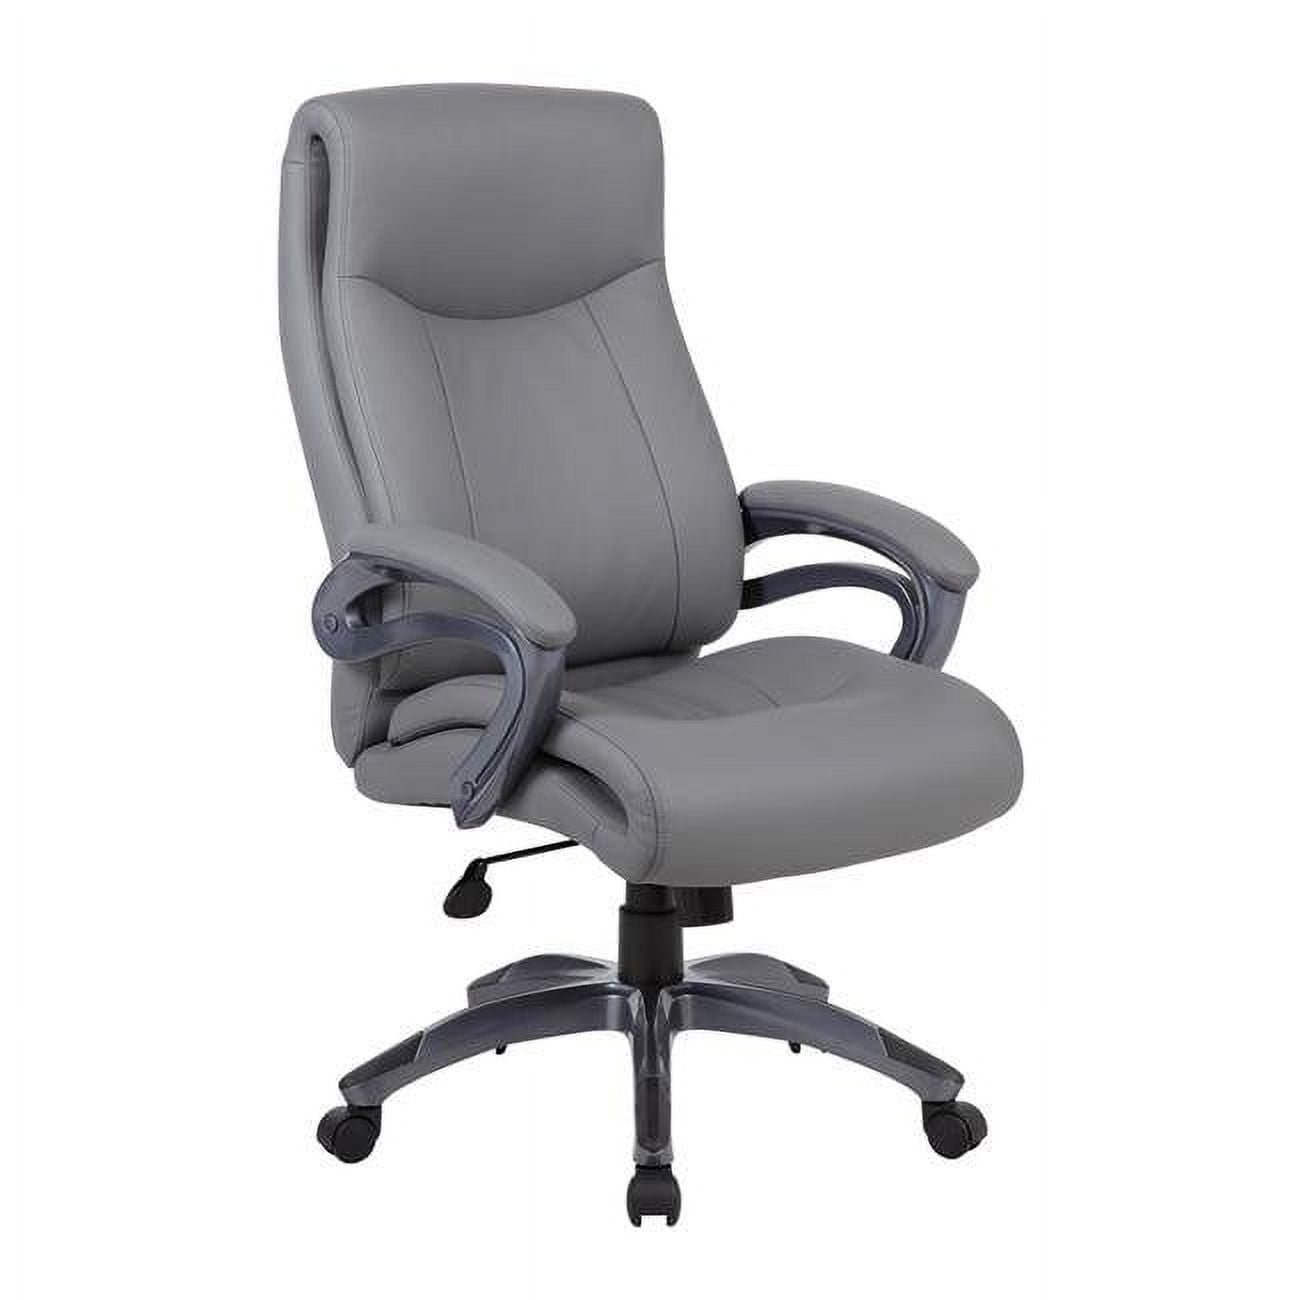 B993s-bk Boss Office Products, Heavy-duty Executive Chair